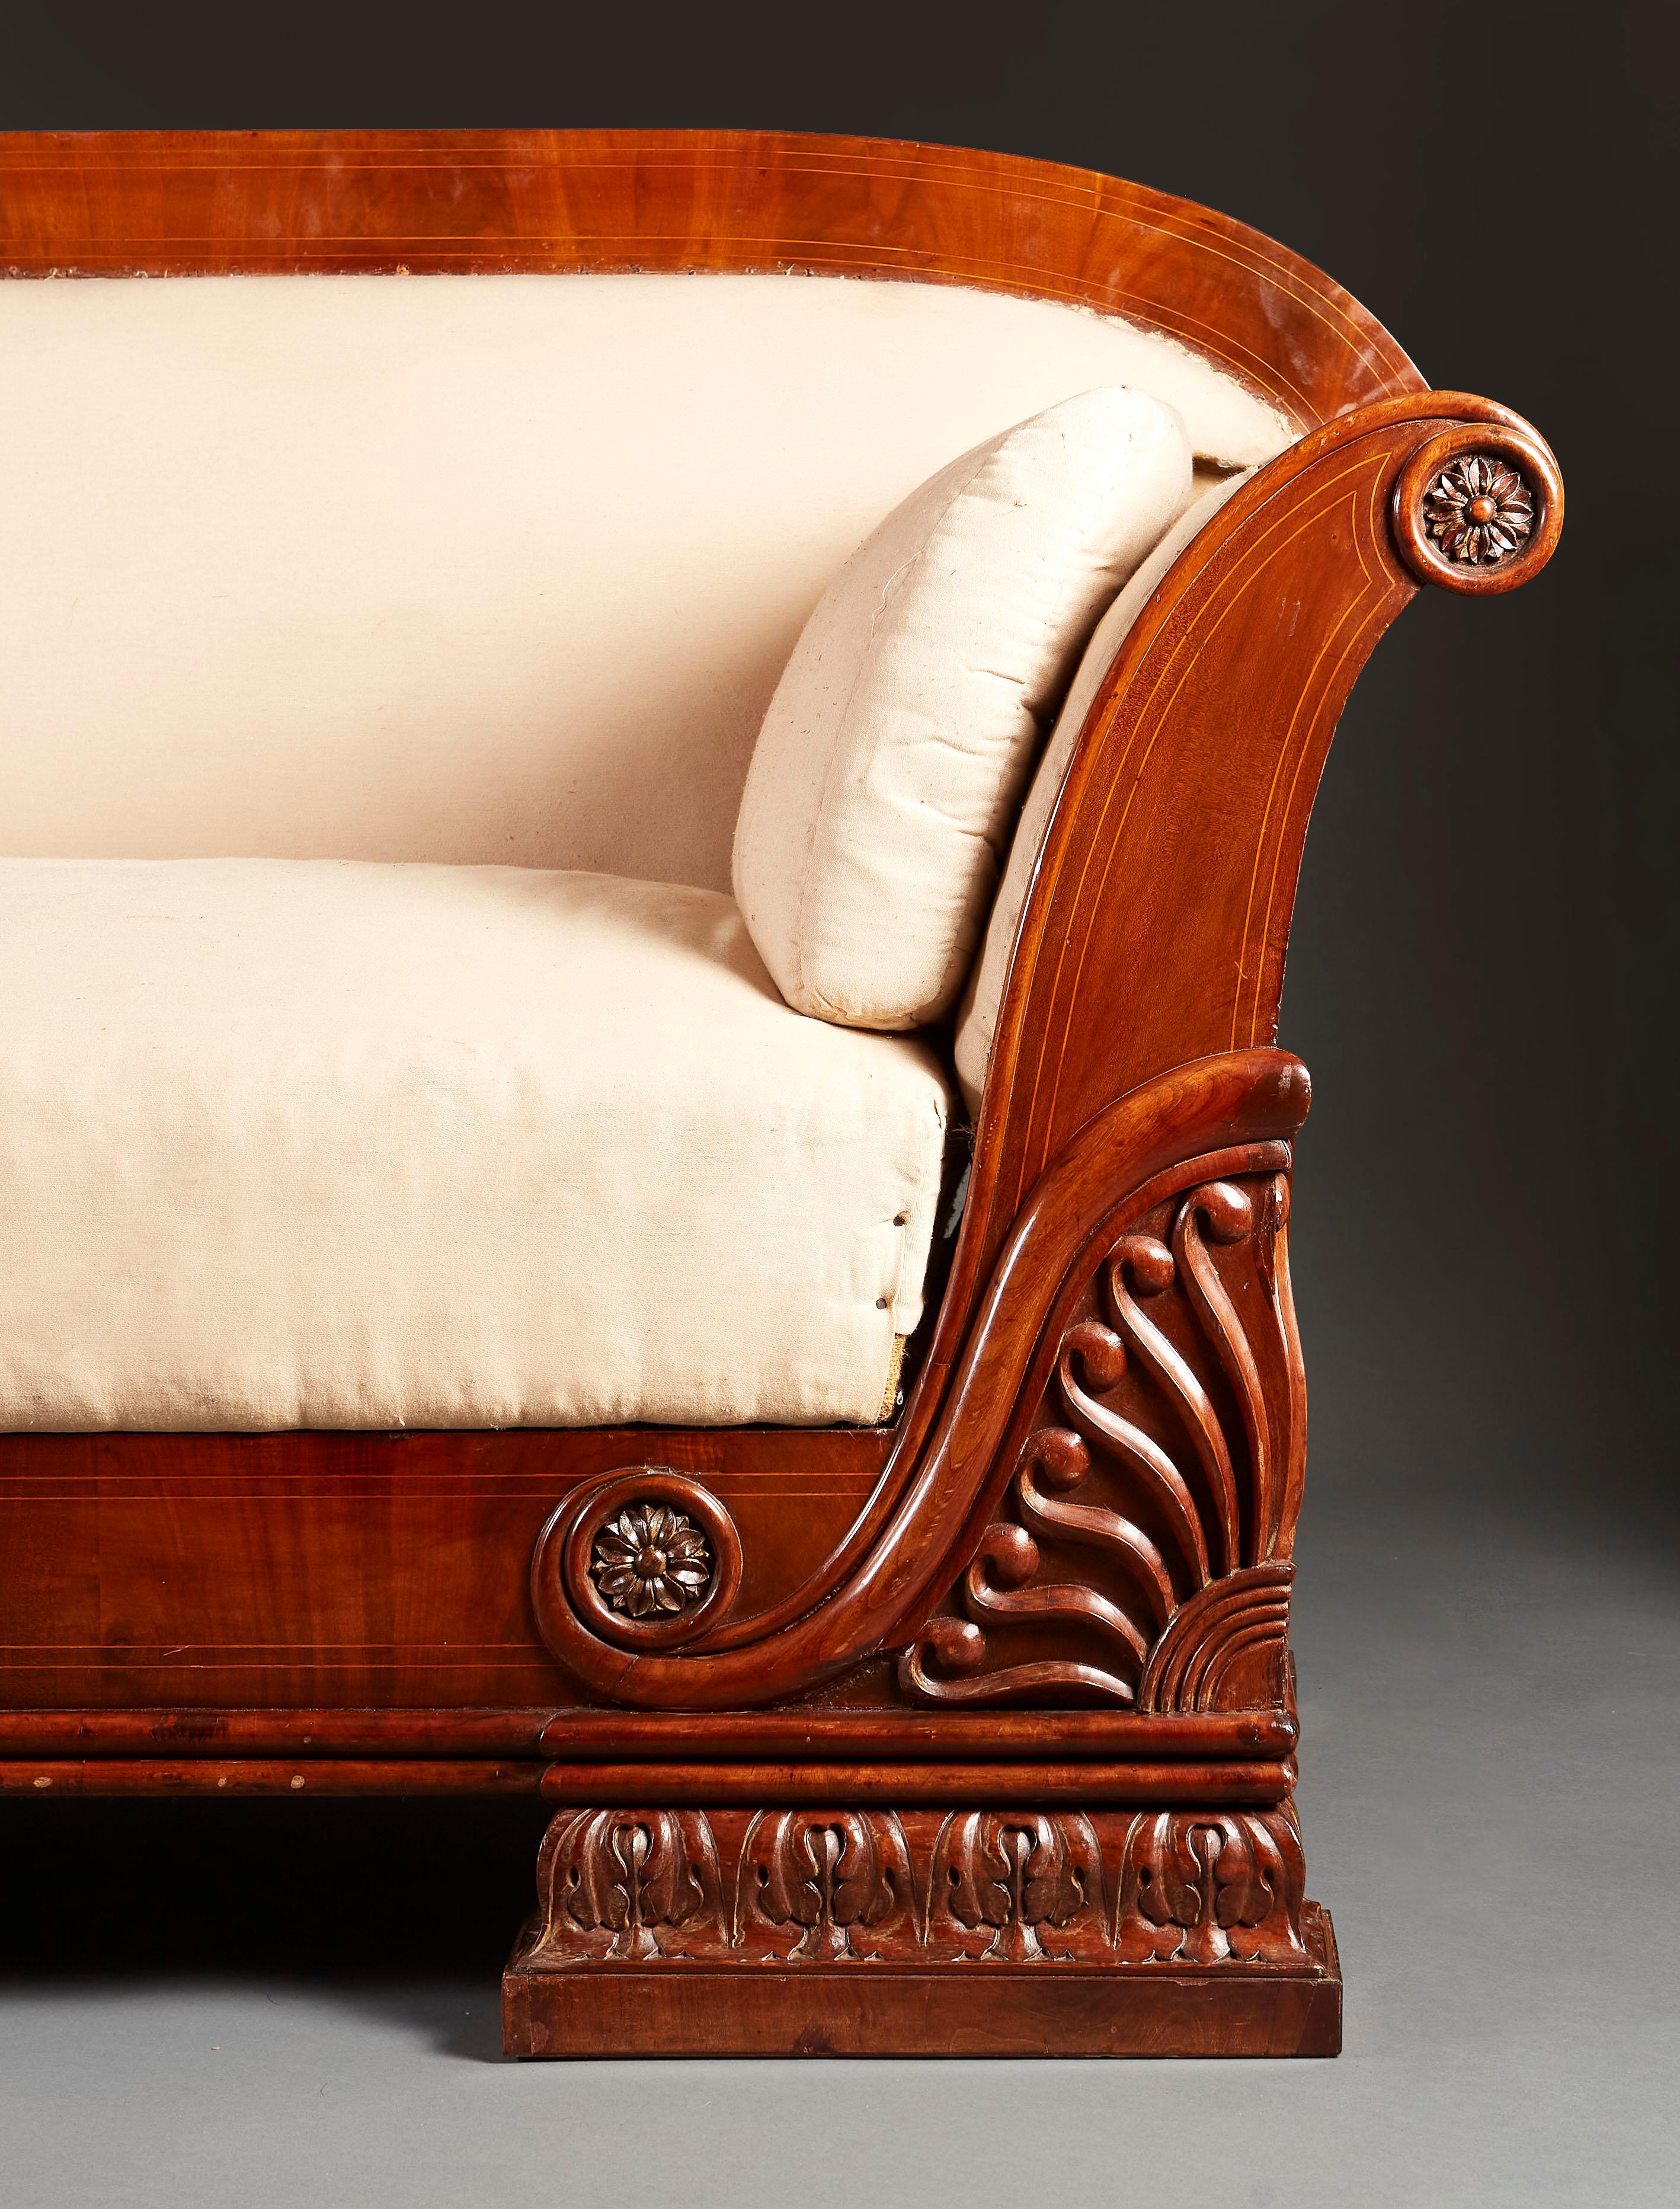 A fine mid nineteenth century Empire sofa, the mahogany frame with unusual carving to the corners and sides, with fans and scrolling decoration, the out swept arms with carved medallions, all supported on bracket feet carved with acanthus leaf motif.